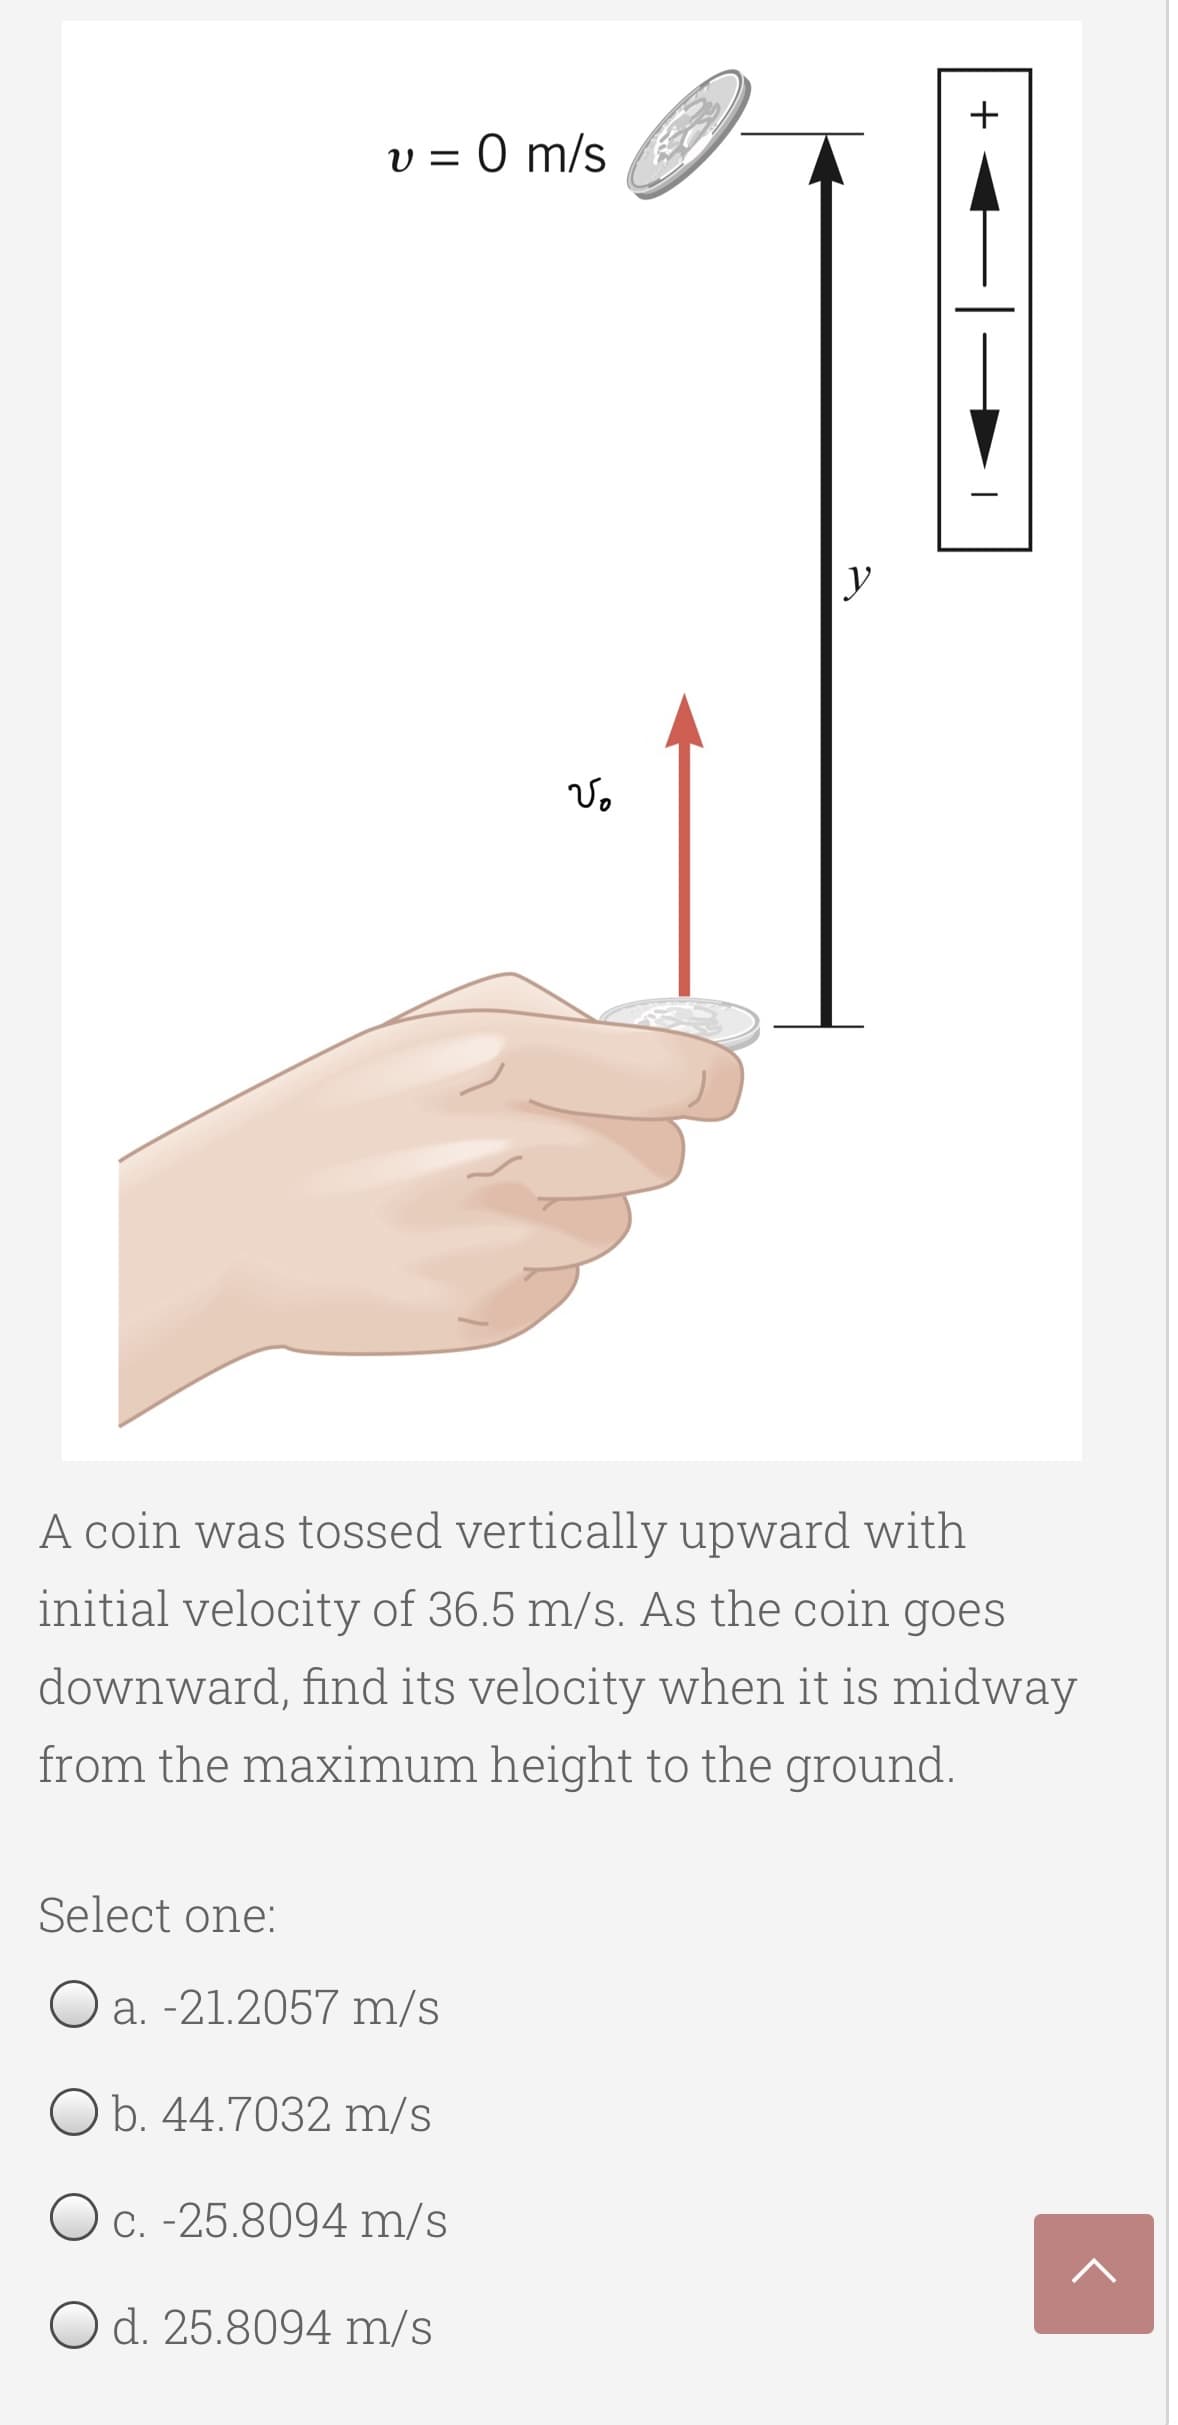 +
v = 0 m/s
A coin was tossed vertically upward with
initial velocity of 36.5 m/s. As the coin goes
downward, find its velocity when it is midway
from the maximum height to the ground.
Select one:
Oa. -21.2057 m/s
O b. 44.7032 m/s
O c. -25.8094 m/s
O d. 25.8094 m/s
